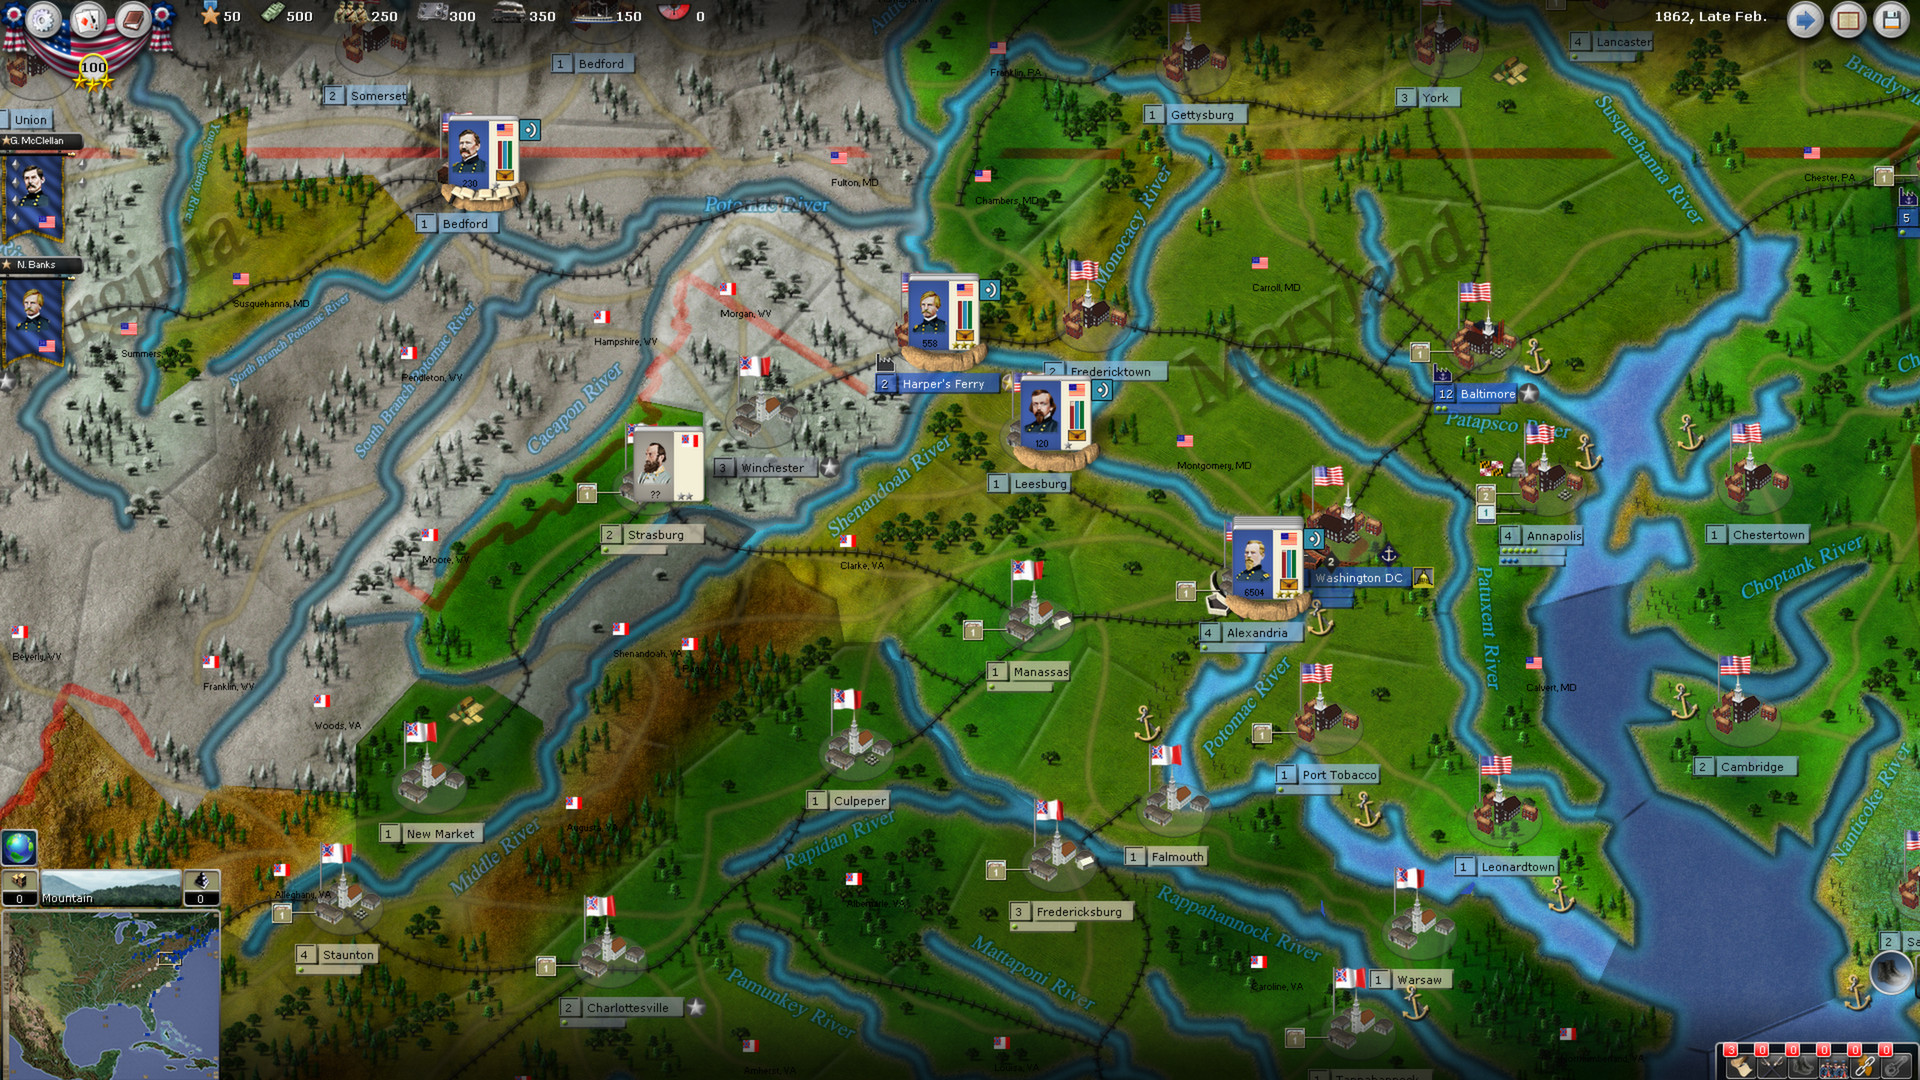 free downloadable war games for pc full version